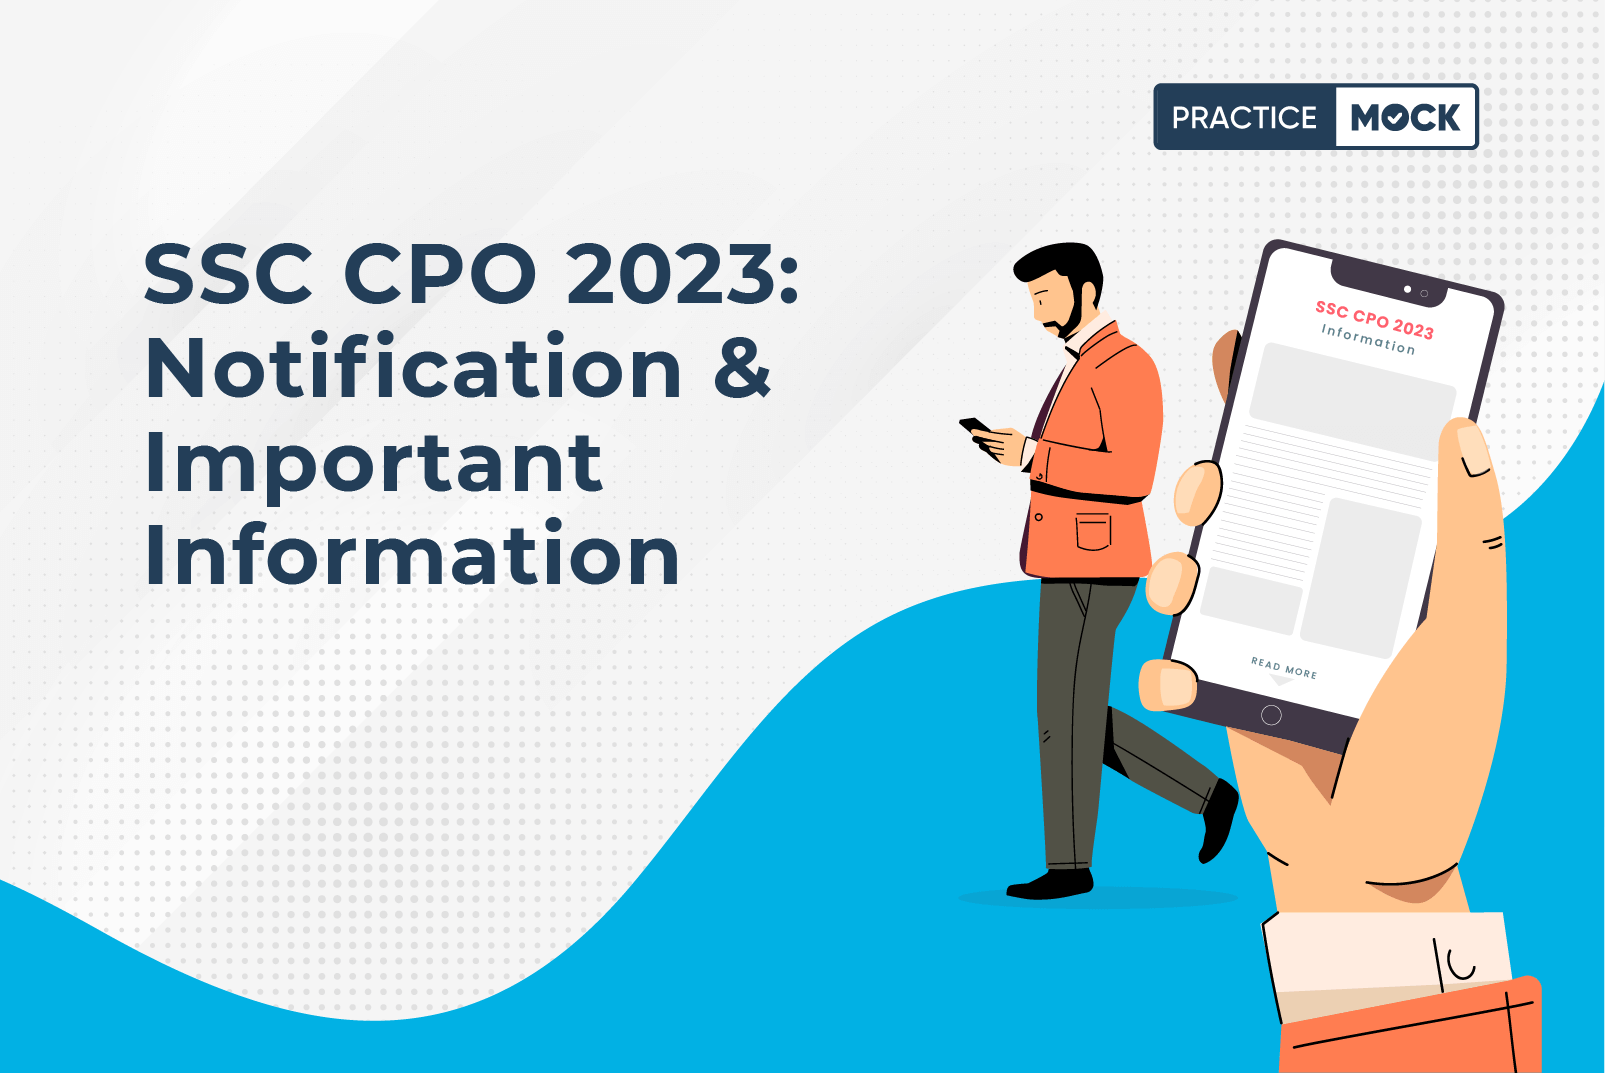 SSC CPO 2023: Notification & Important information